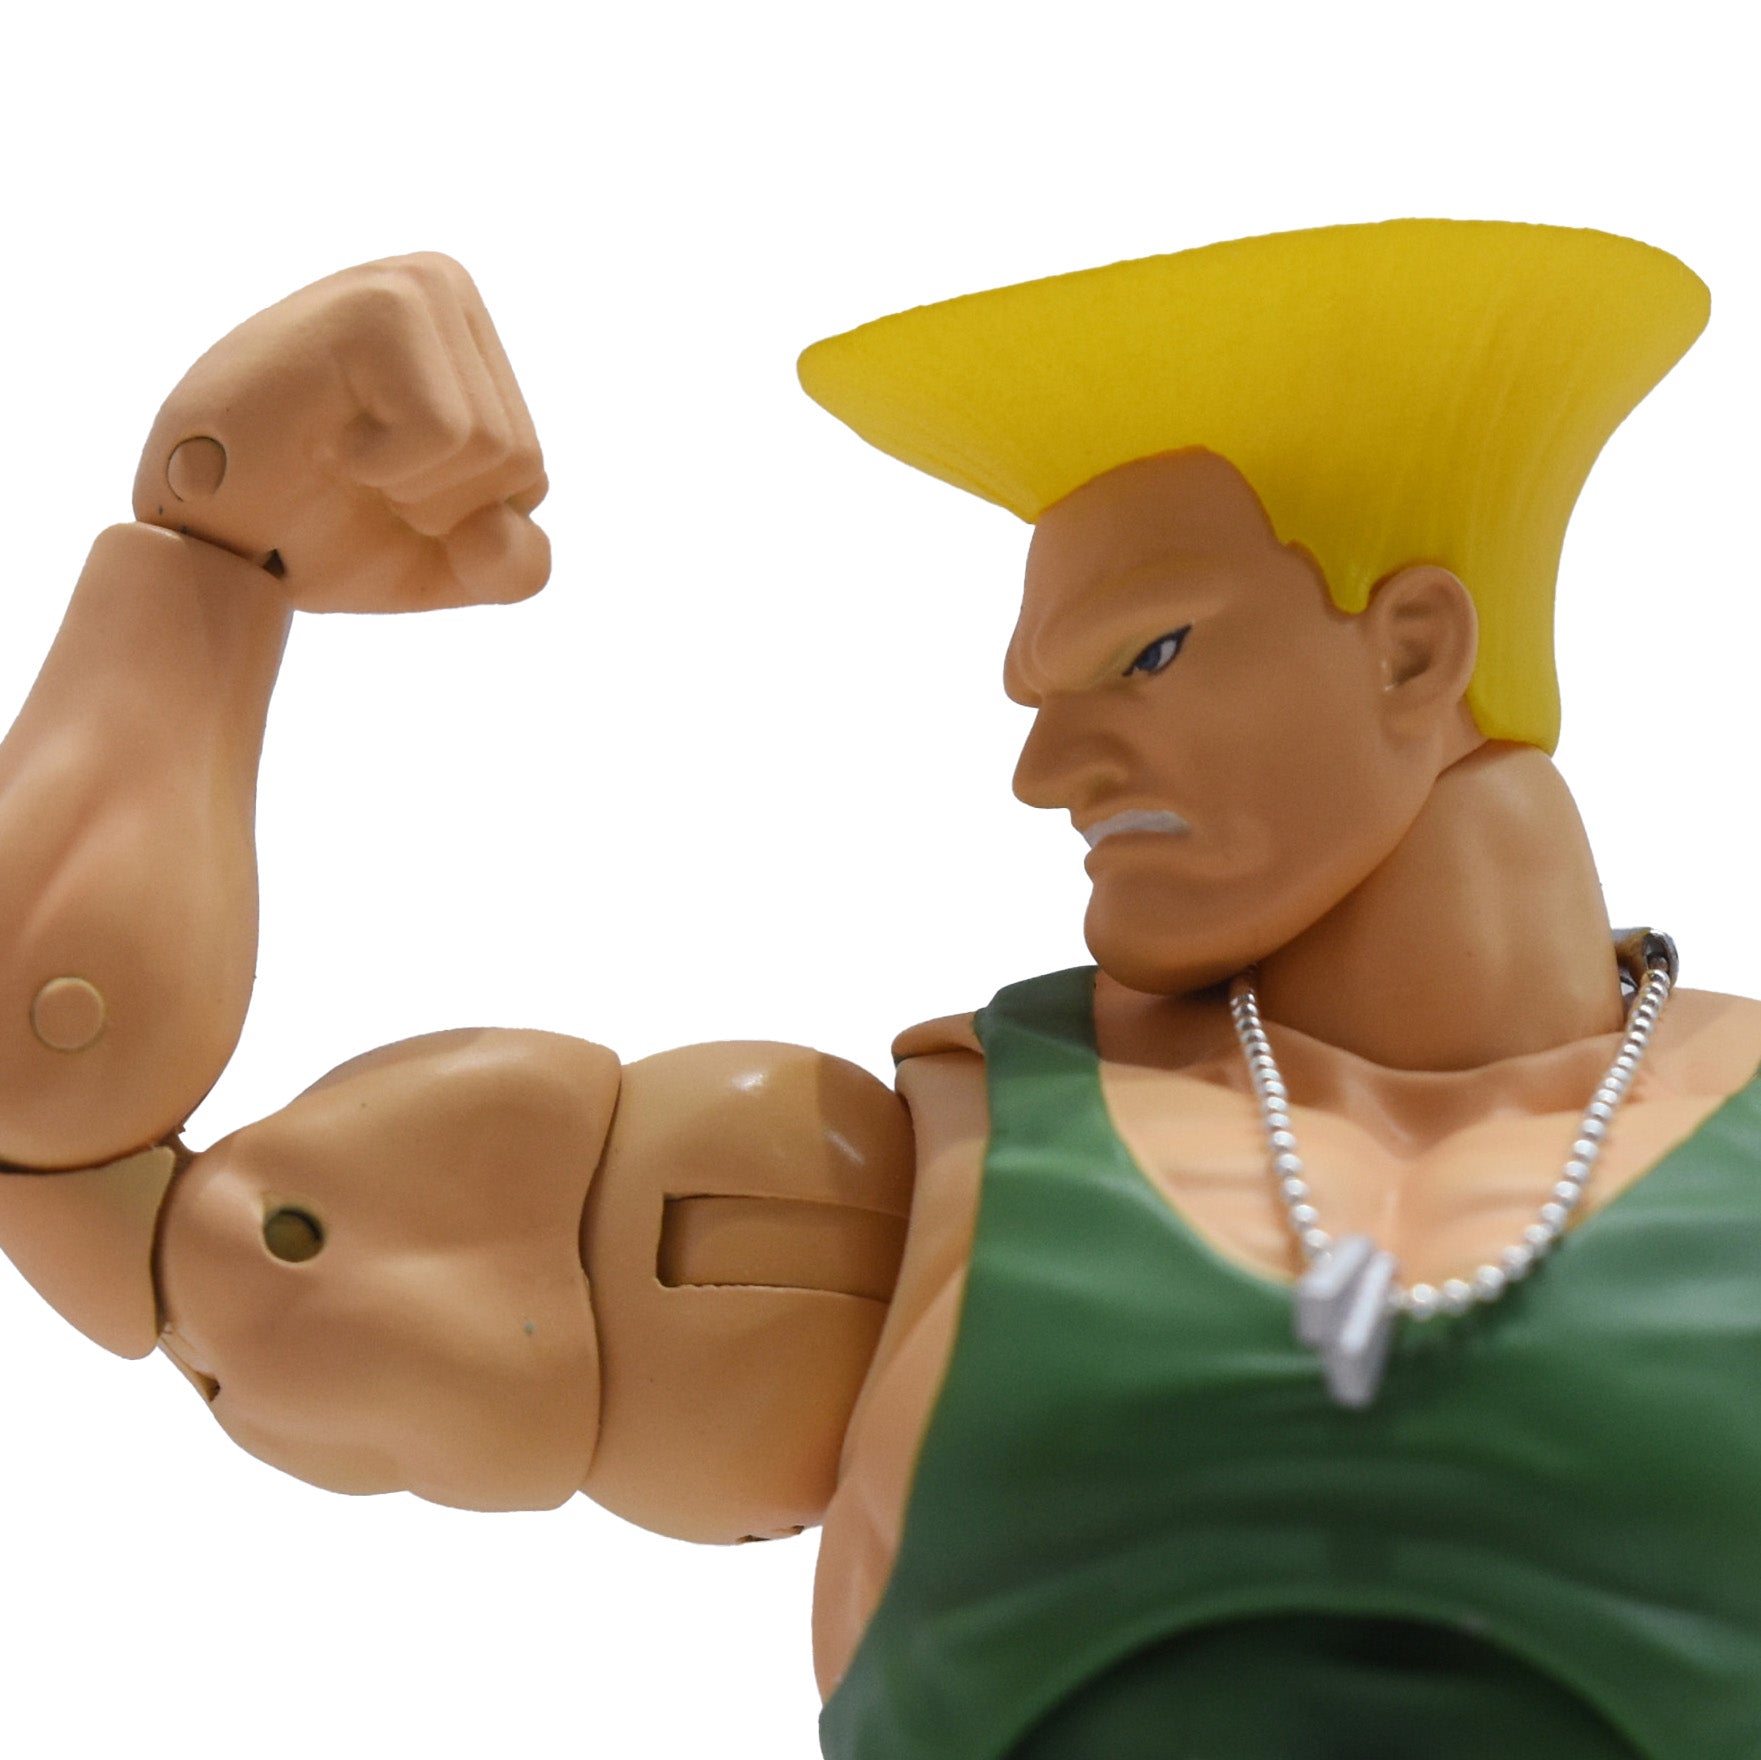 Jada Toys - Ultra Street Fighter II: The Final Challengers - Guile (6&quot;) - Marvelous Toys